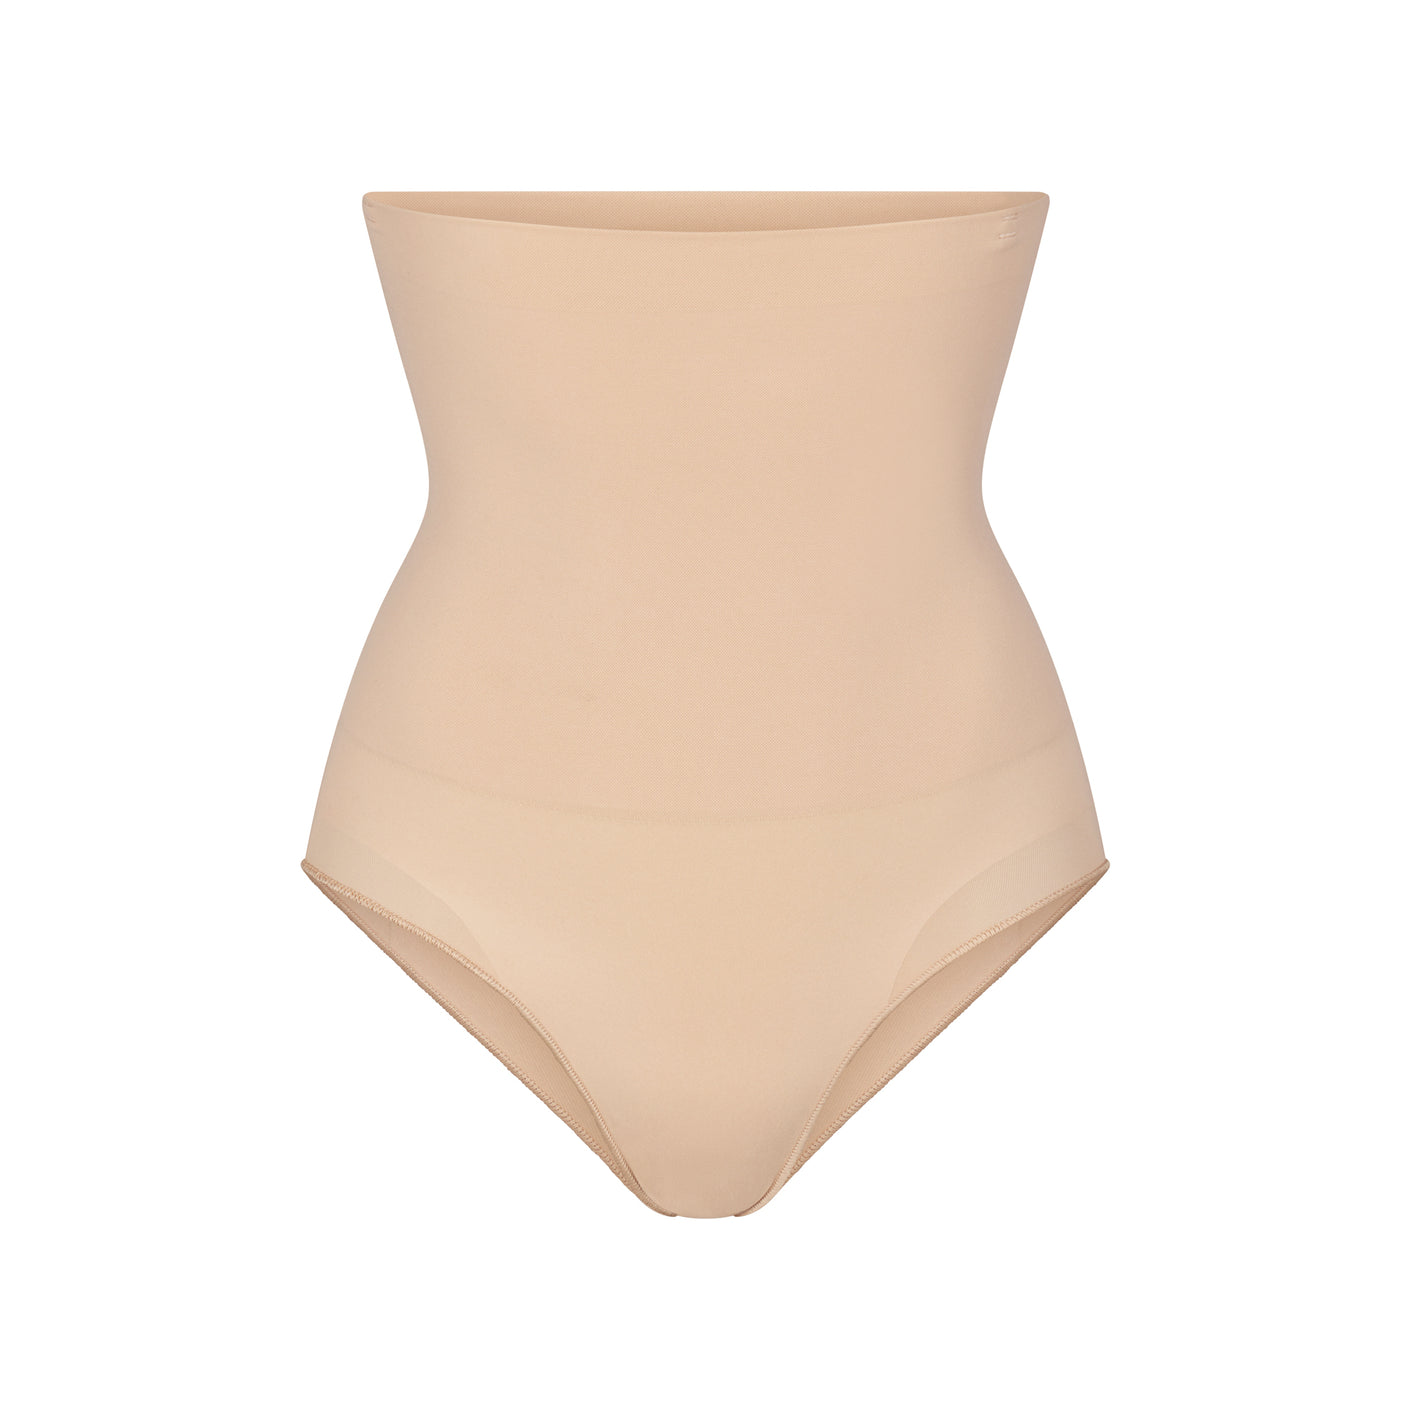 CORE CONTROL HIGH-WAISTED BRIEF